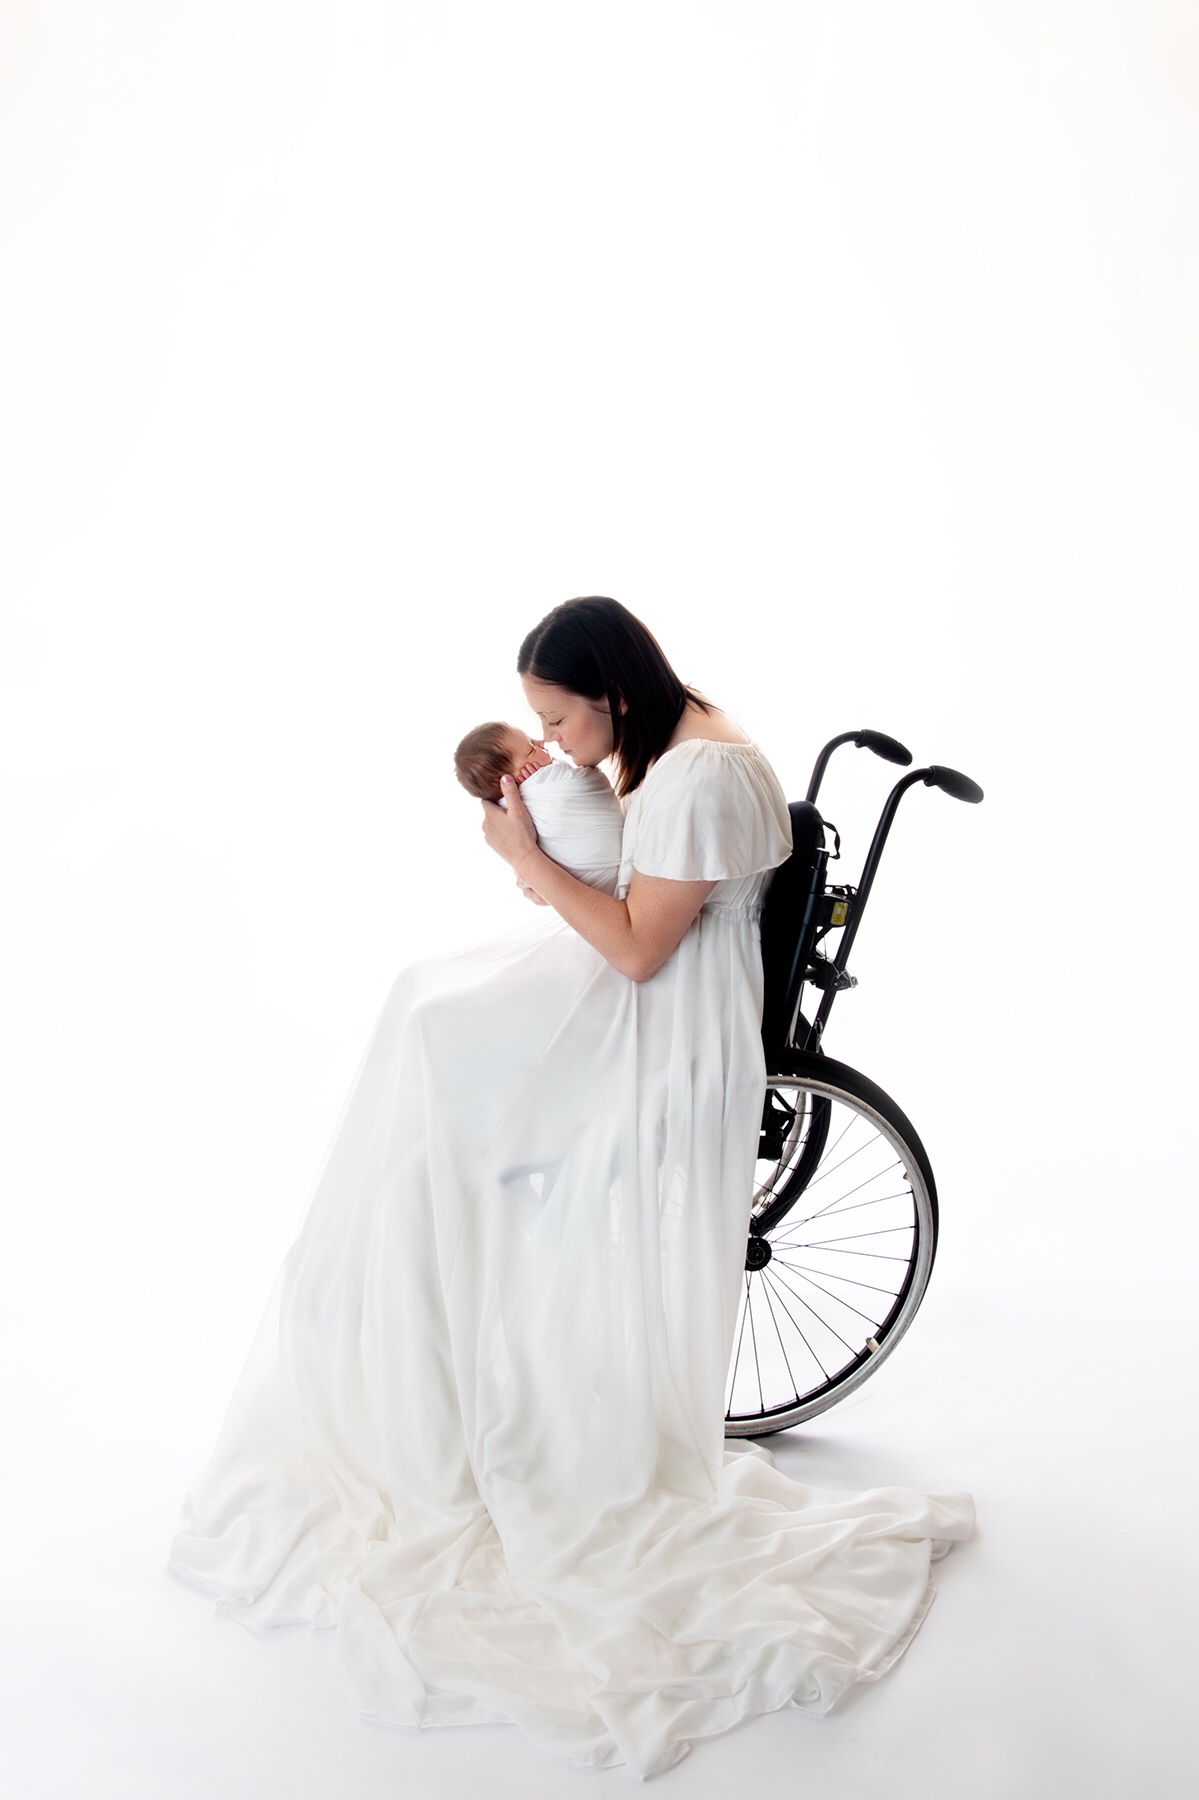 Woman With Cerebral Palsy